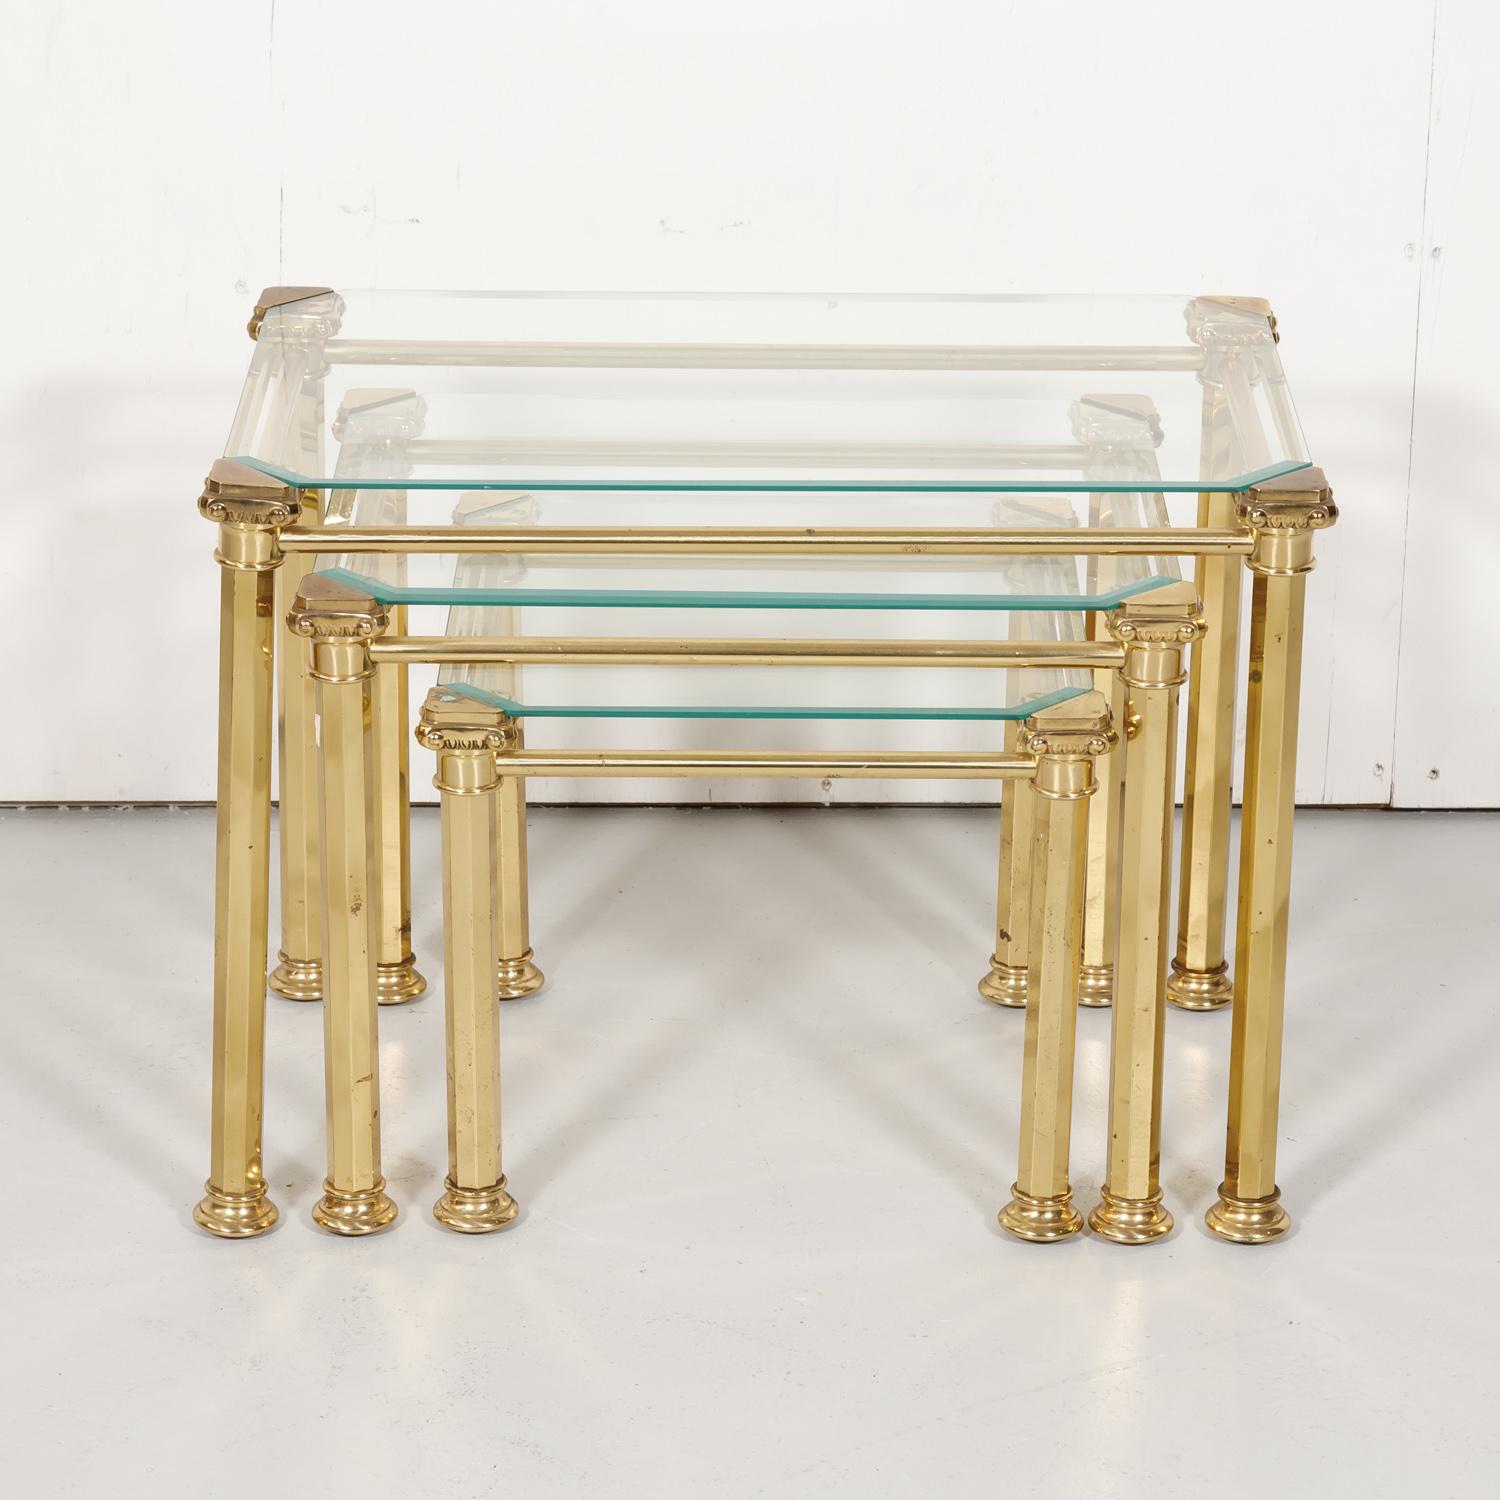 Set of Three French Mid-Century Modern Brass and Glass Nesting Tables by Maison 4